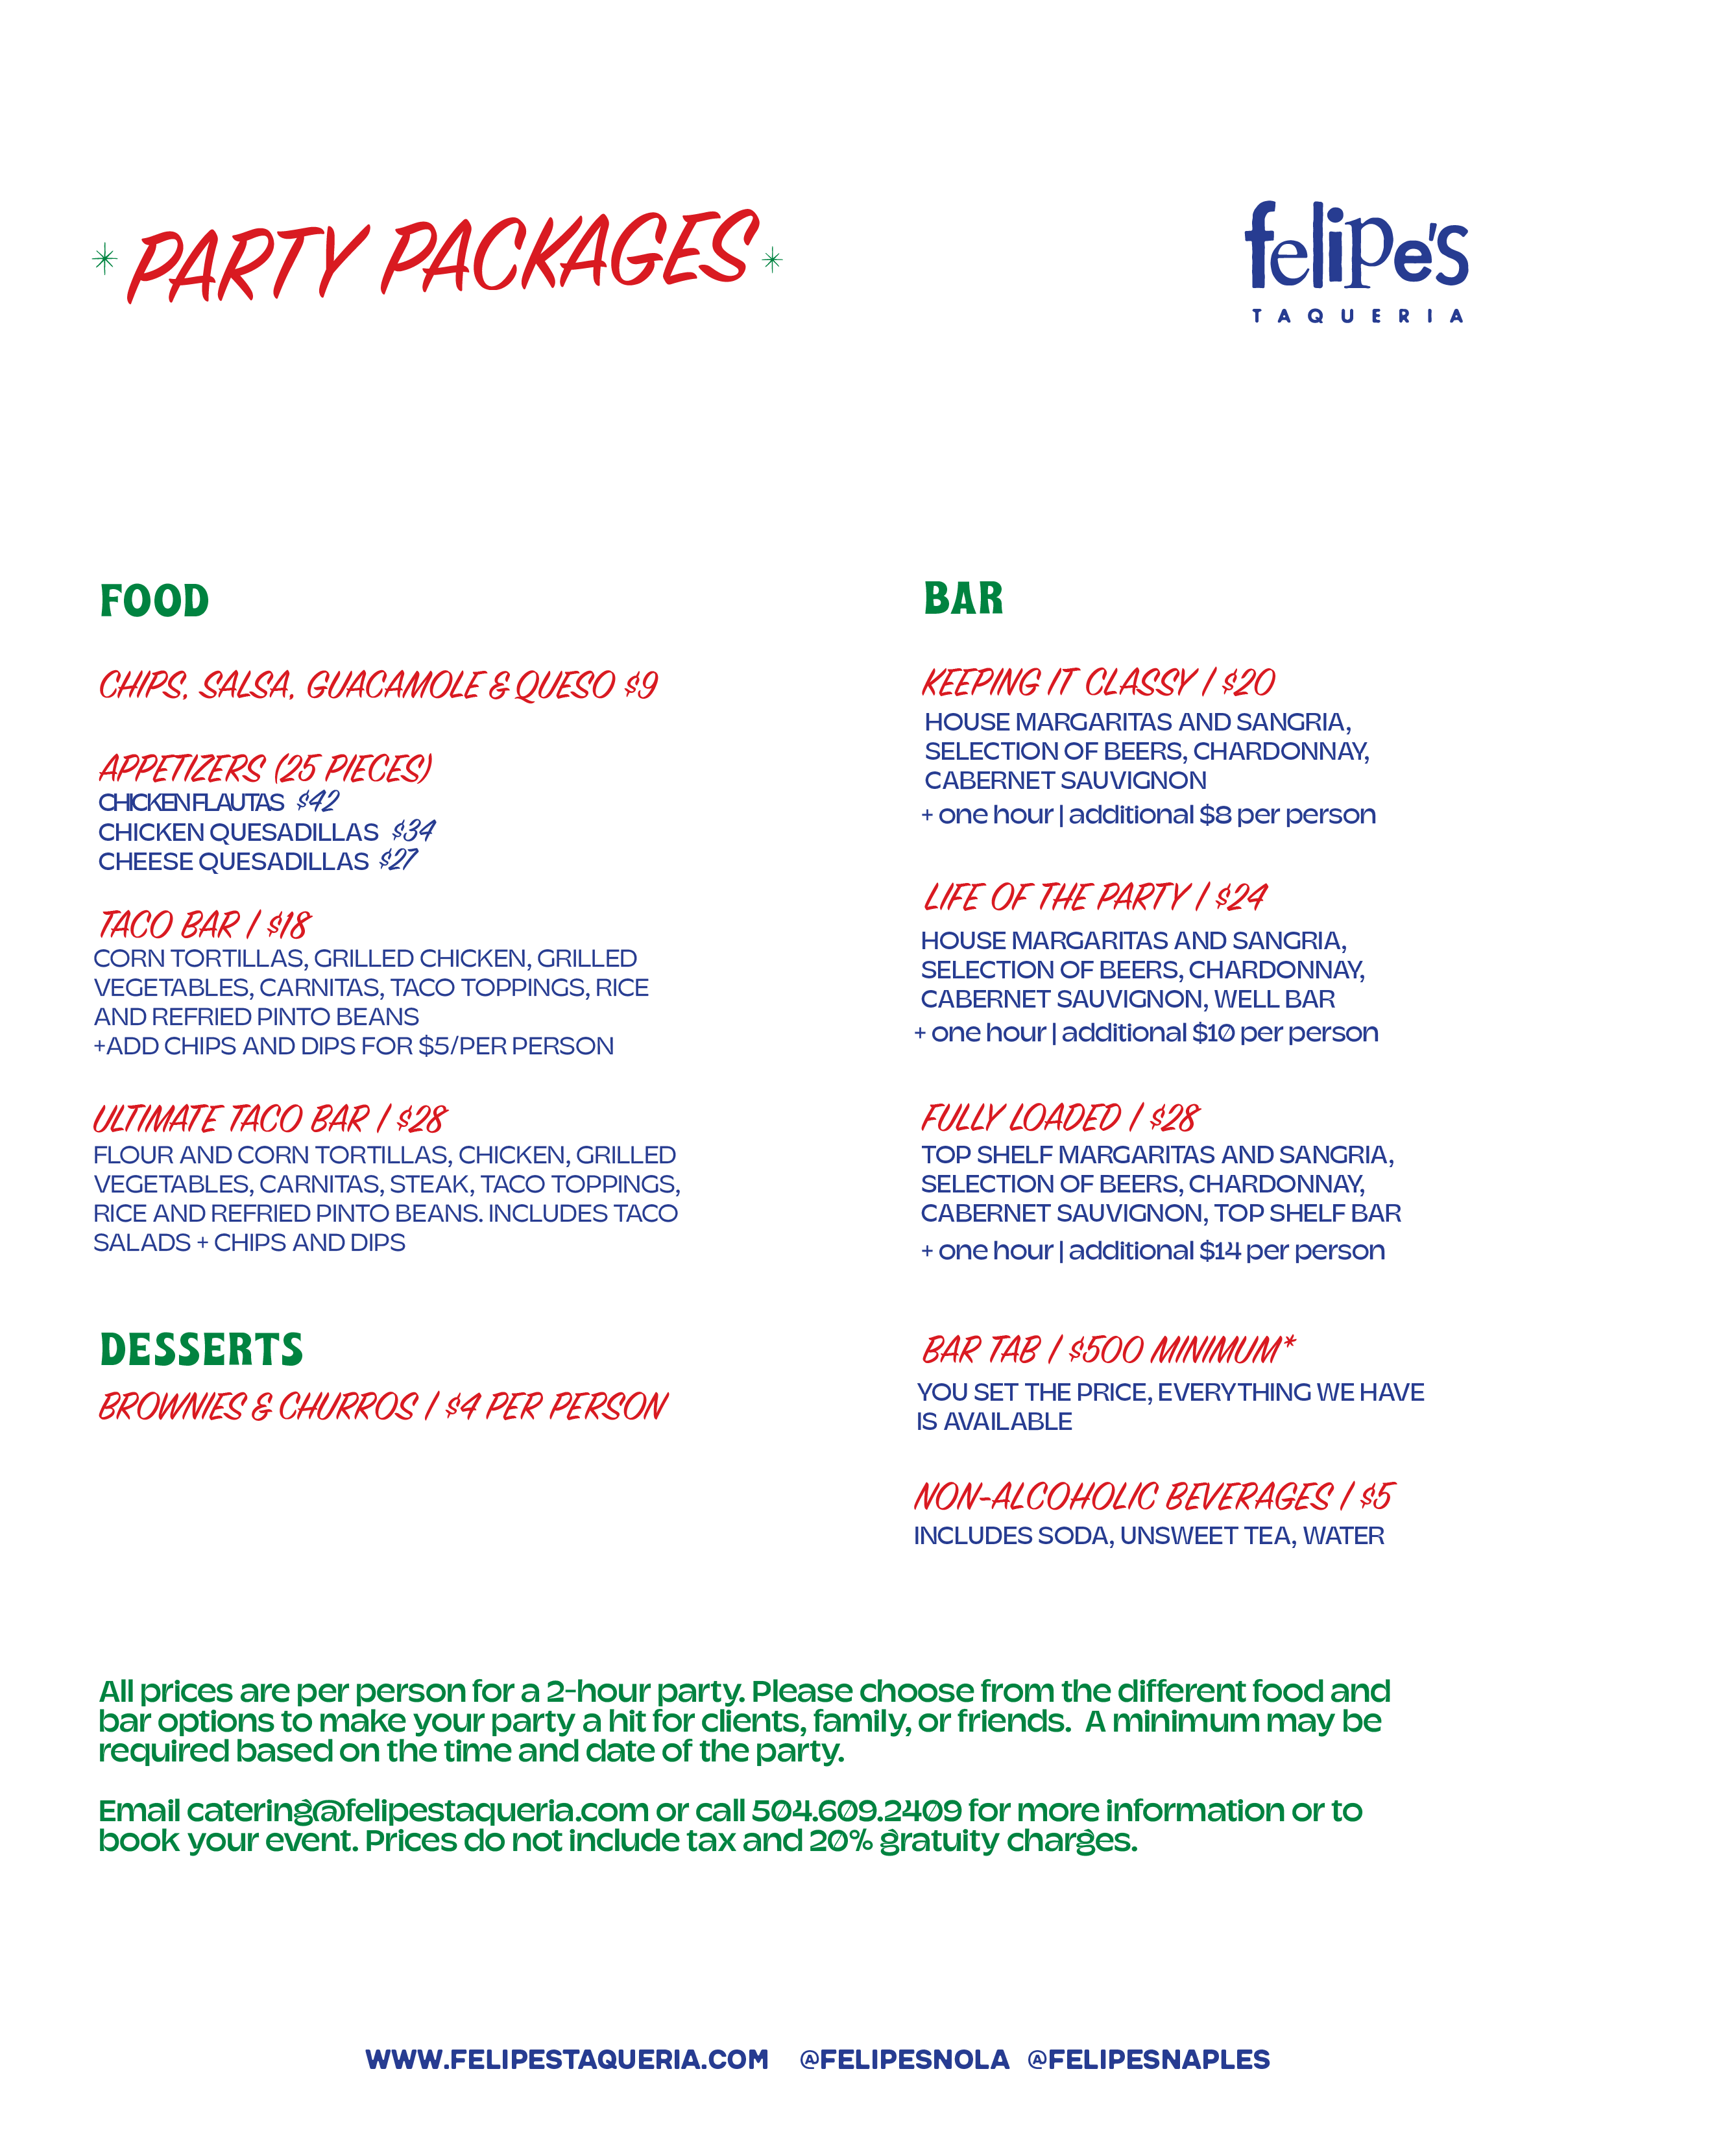 Felipe's Private Party Packages